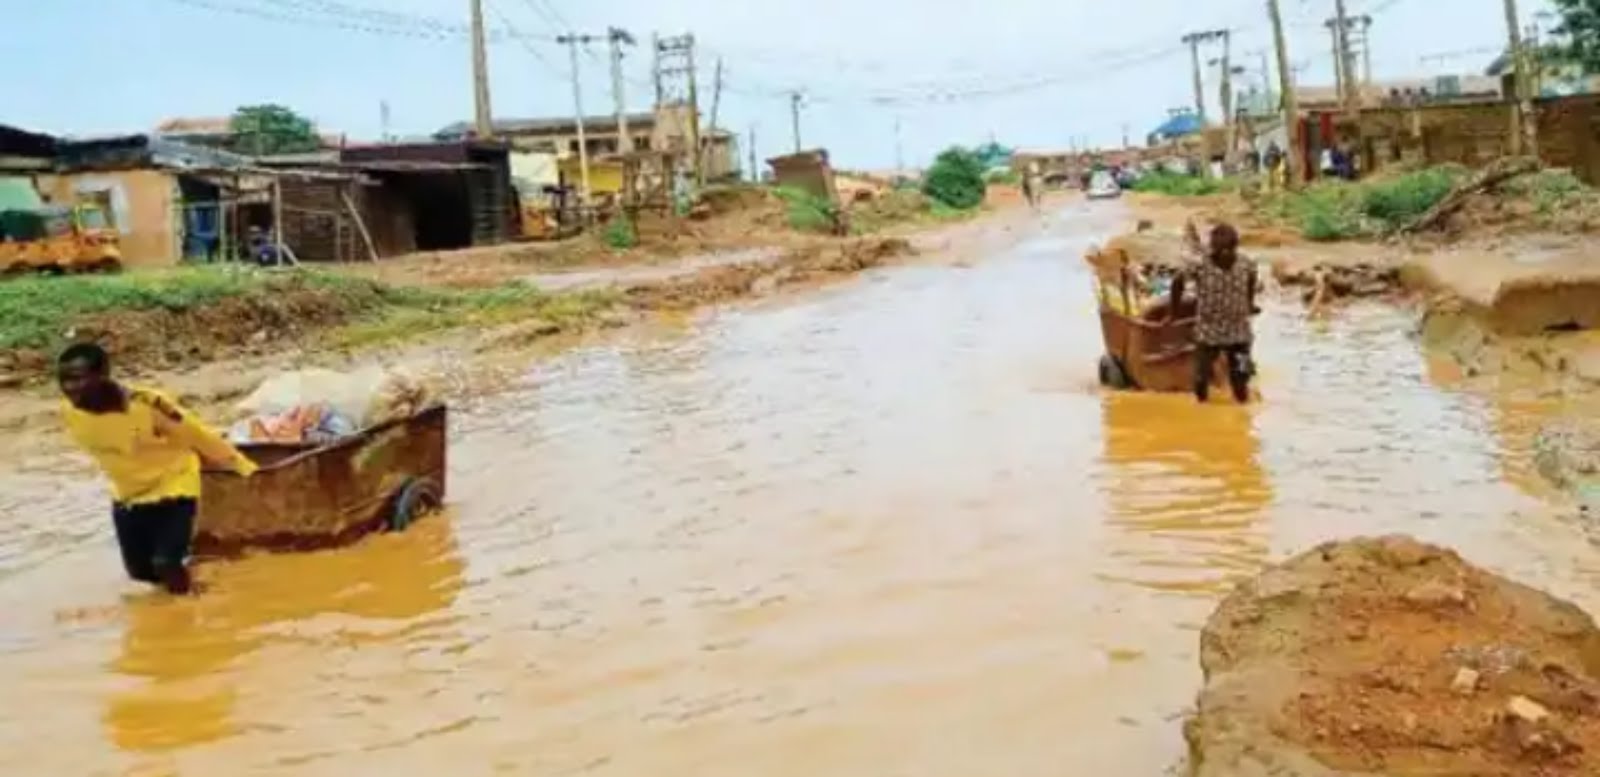 As water come pass garri, Residents in Ogun State communities flee homes due to bad roads. 😭😭 - infopedia